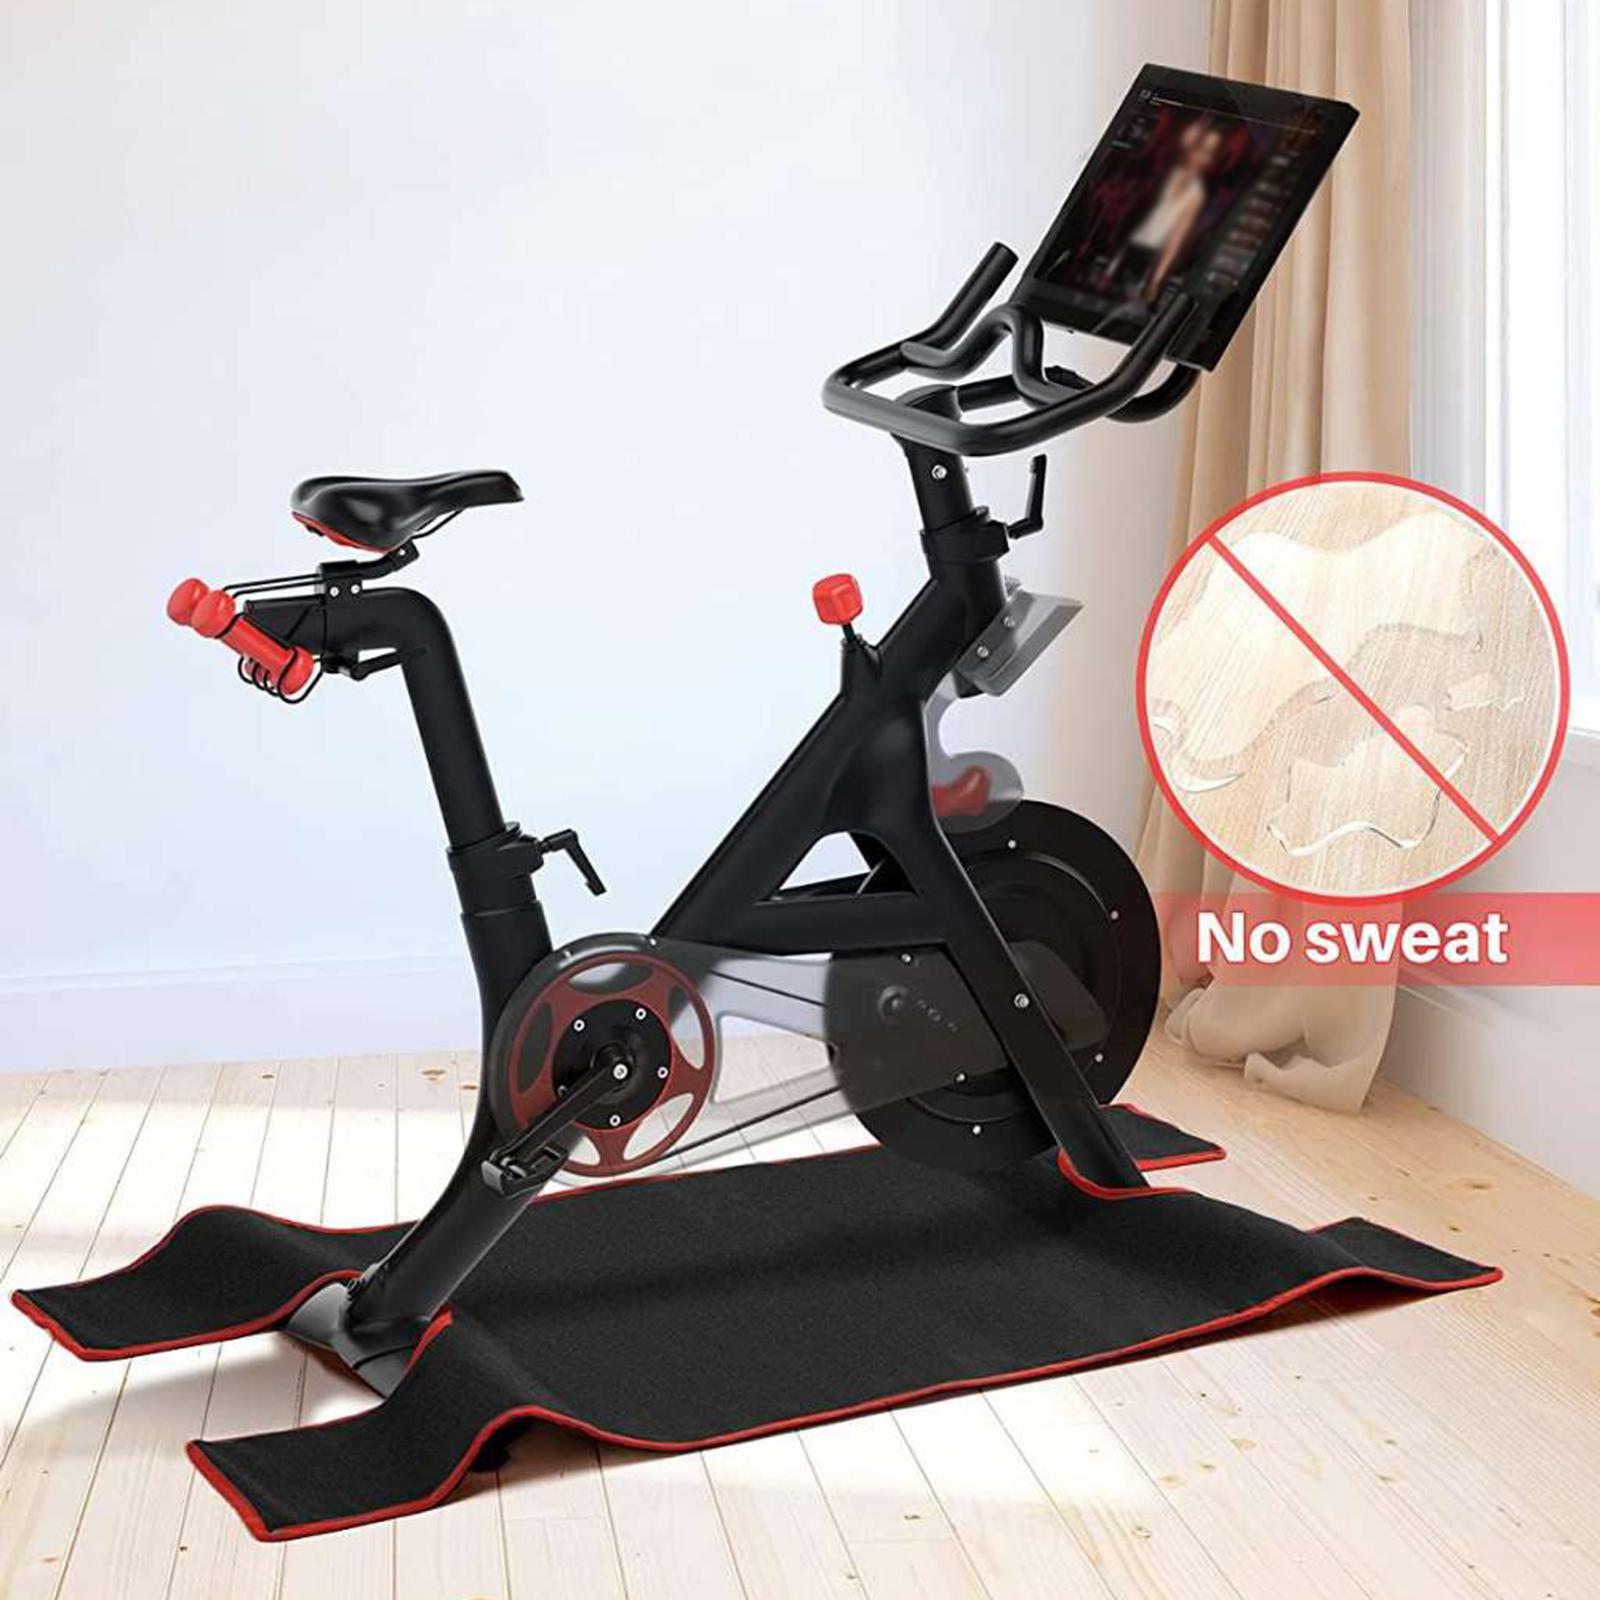 Exercise Bike Mat Stationary Bike Steppers Training Pad for Carpets Home Use